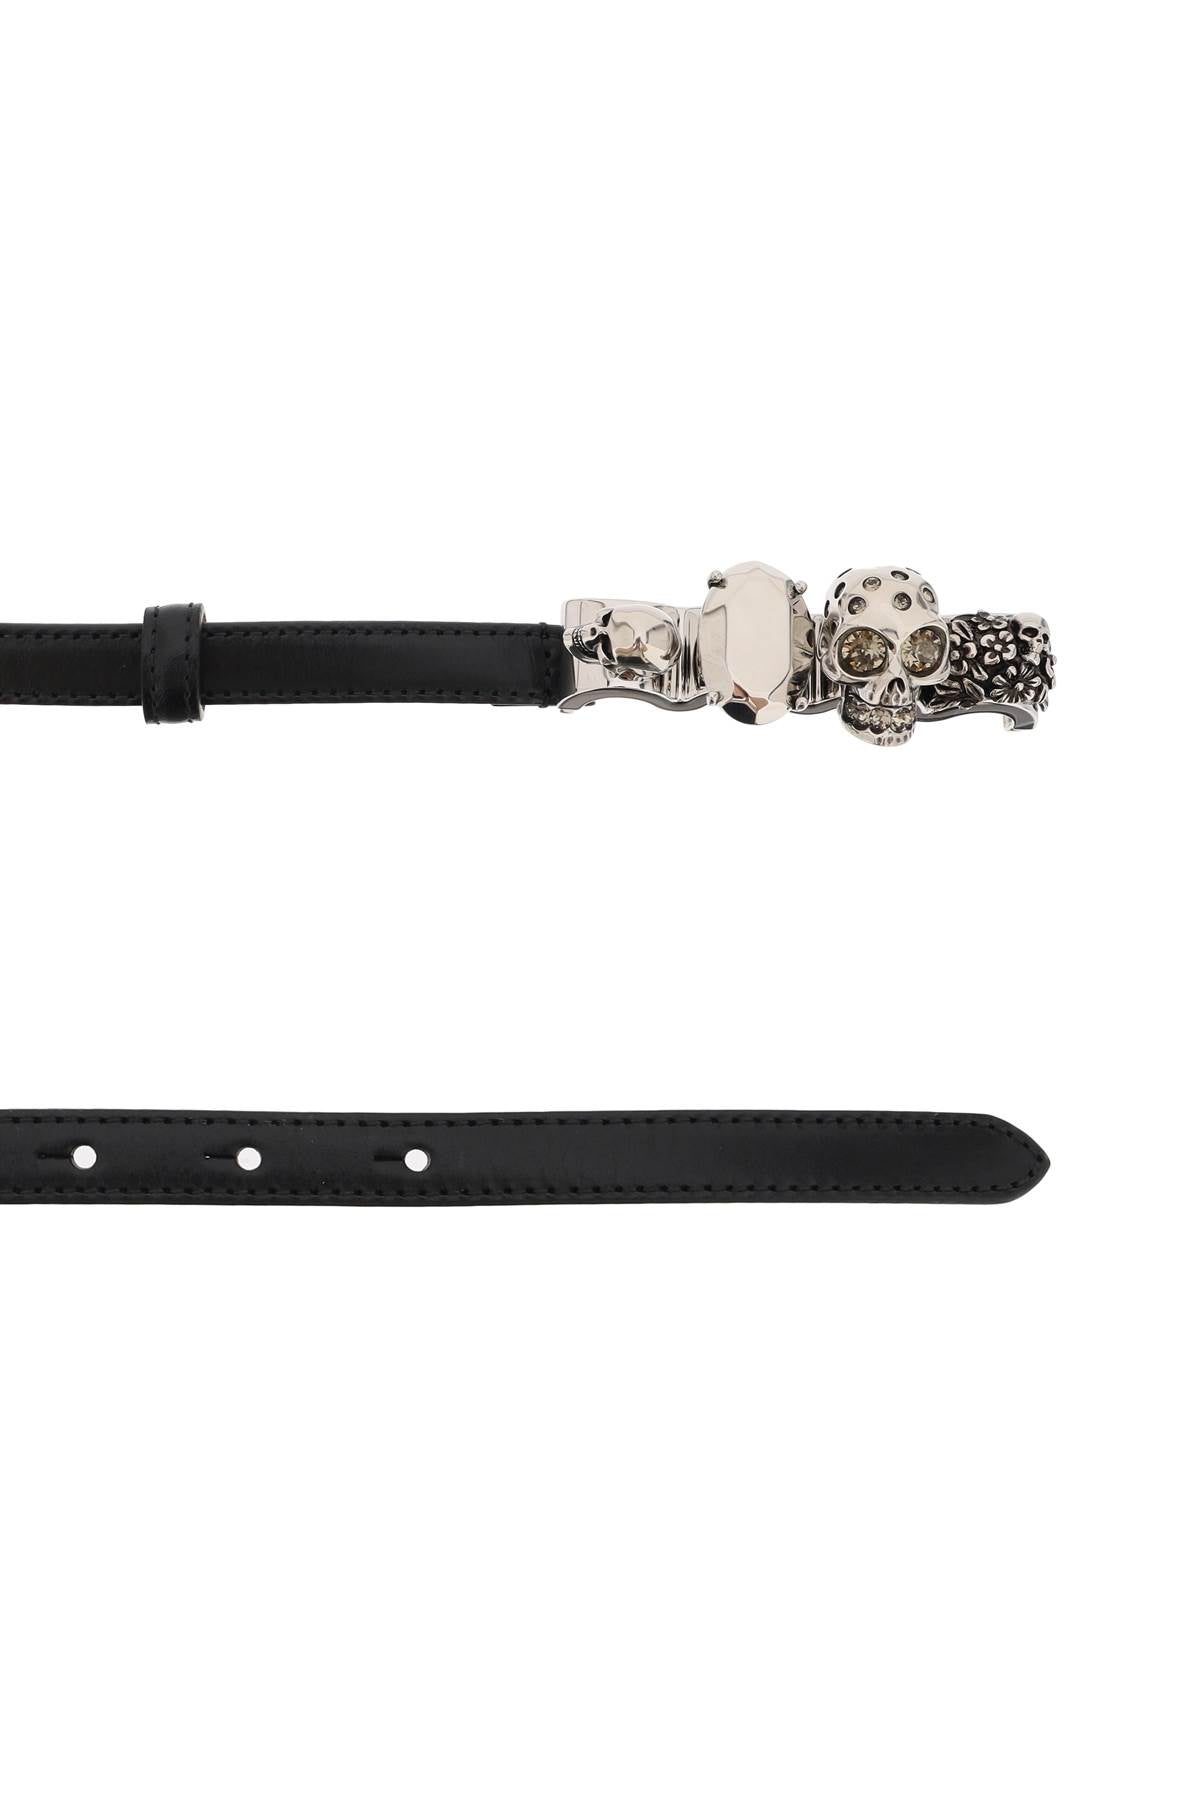 ALEXANDER MCQUEEN Smooth Leather Knuckle Belt with Antique Silver-Finished Buckle